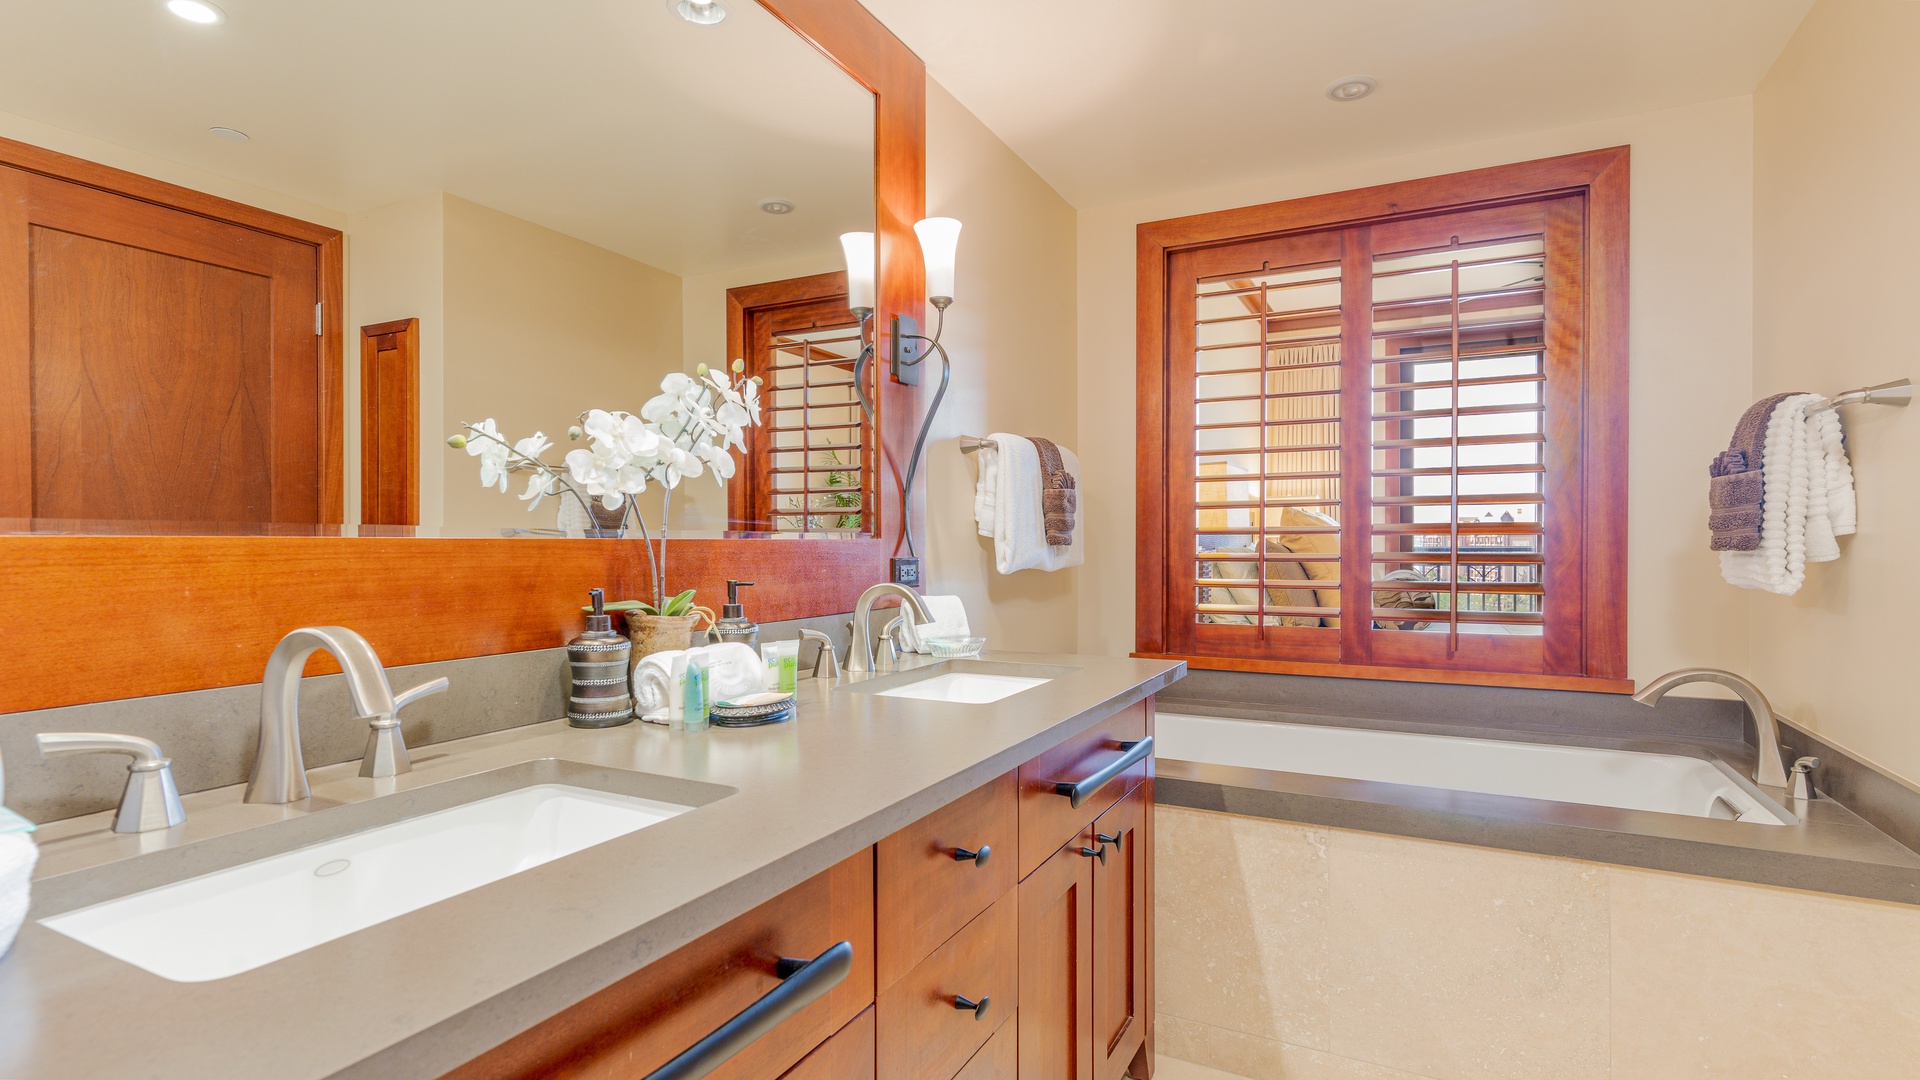 Kapolei Vacation Rentals, Ko Olina Beach Villas B1101 - The primary guest bathroom has a double vanity and luxurious soaking tub.